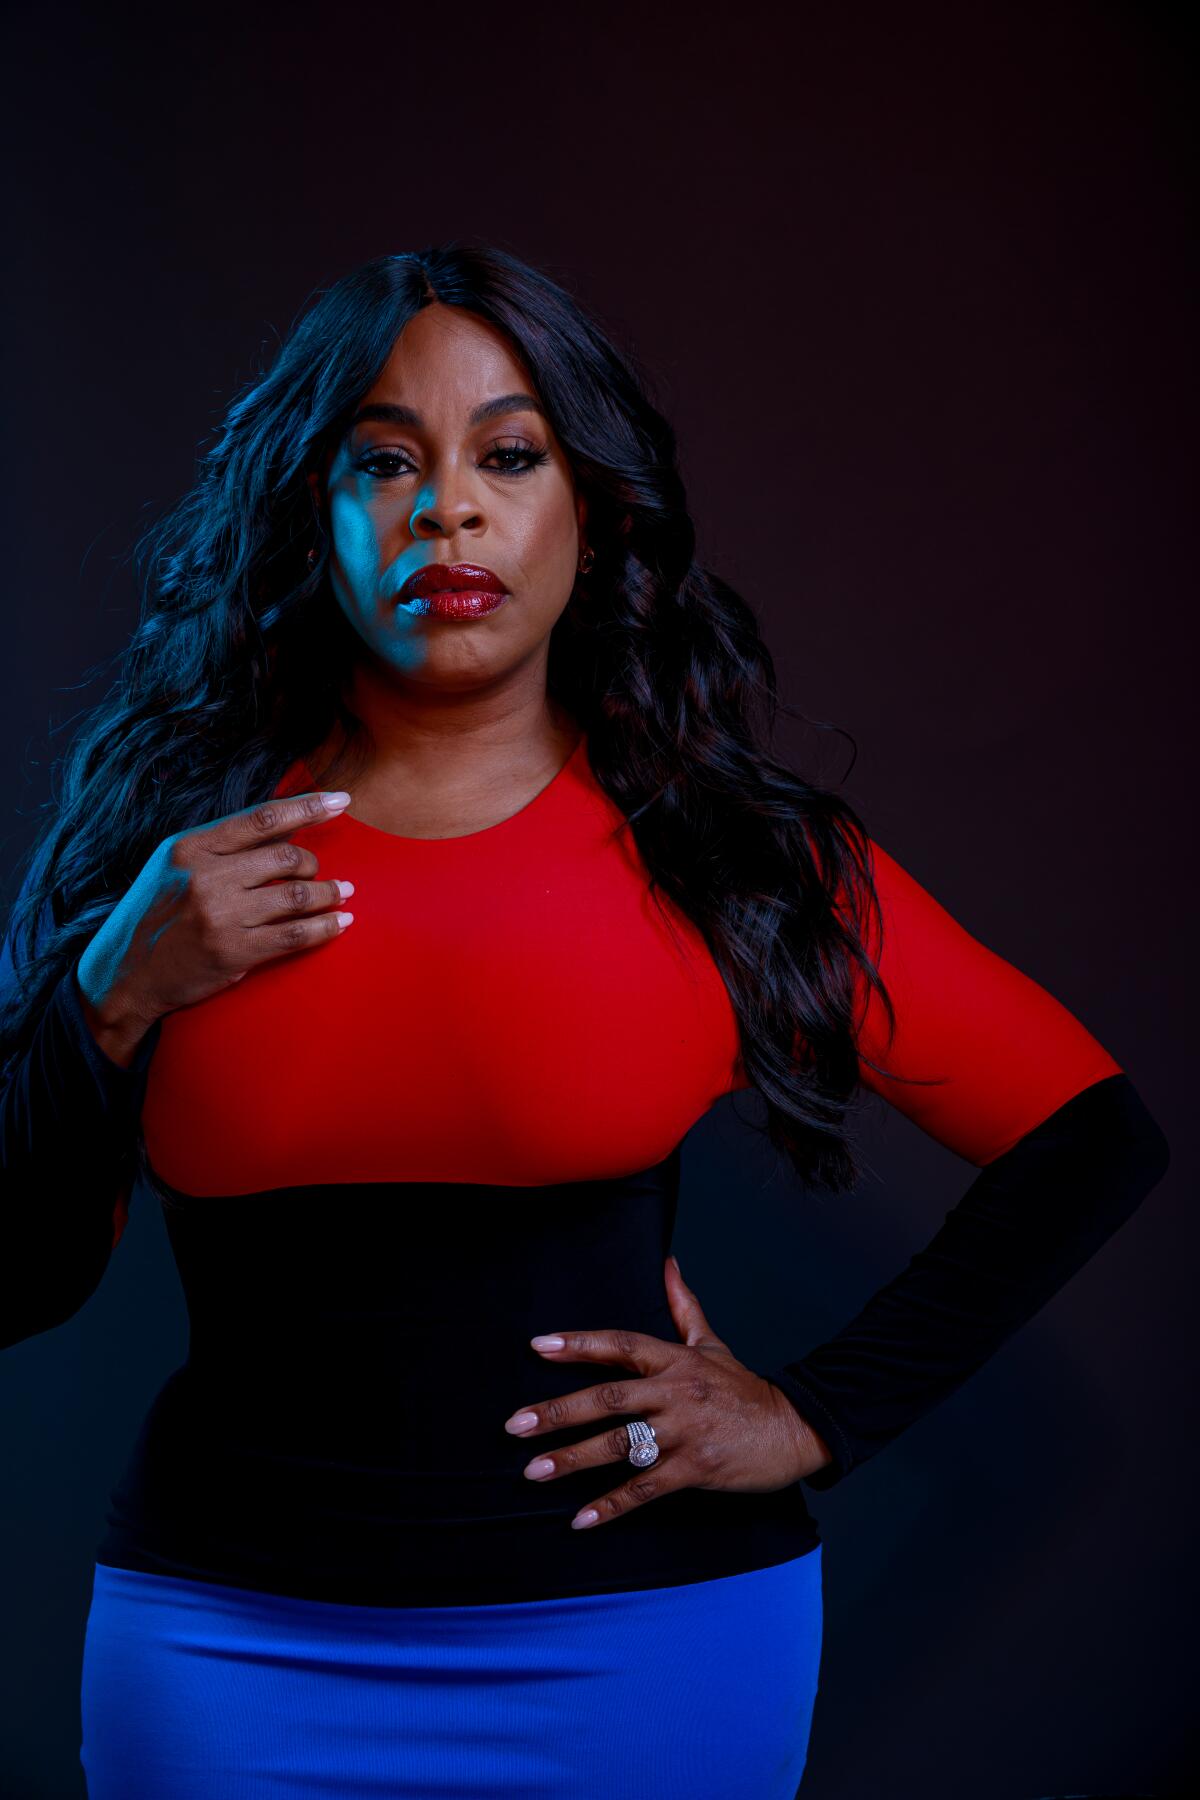 Niecy Nash earned an Emmy nomination for her role in "When They See Us"